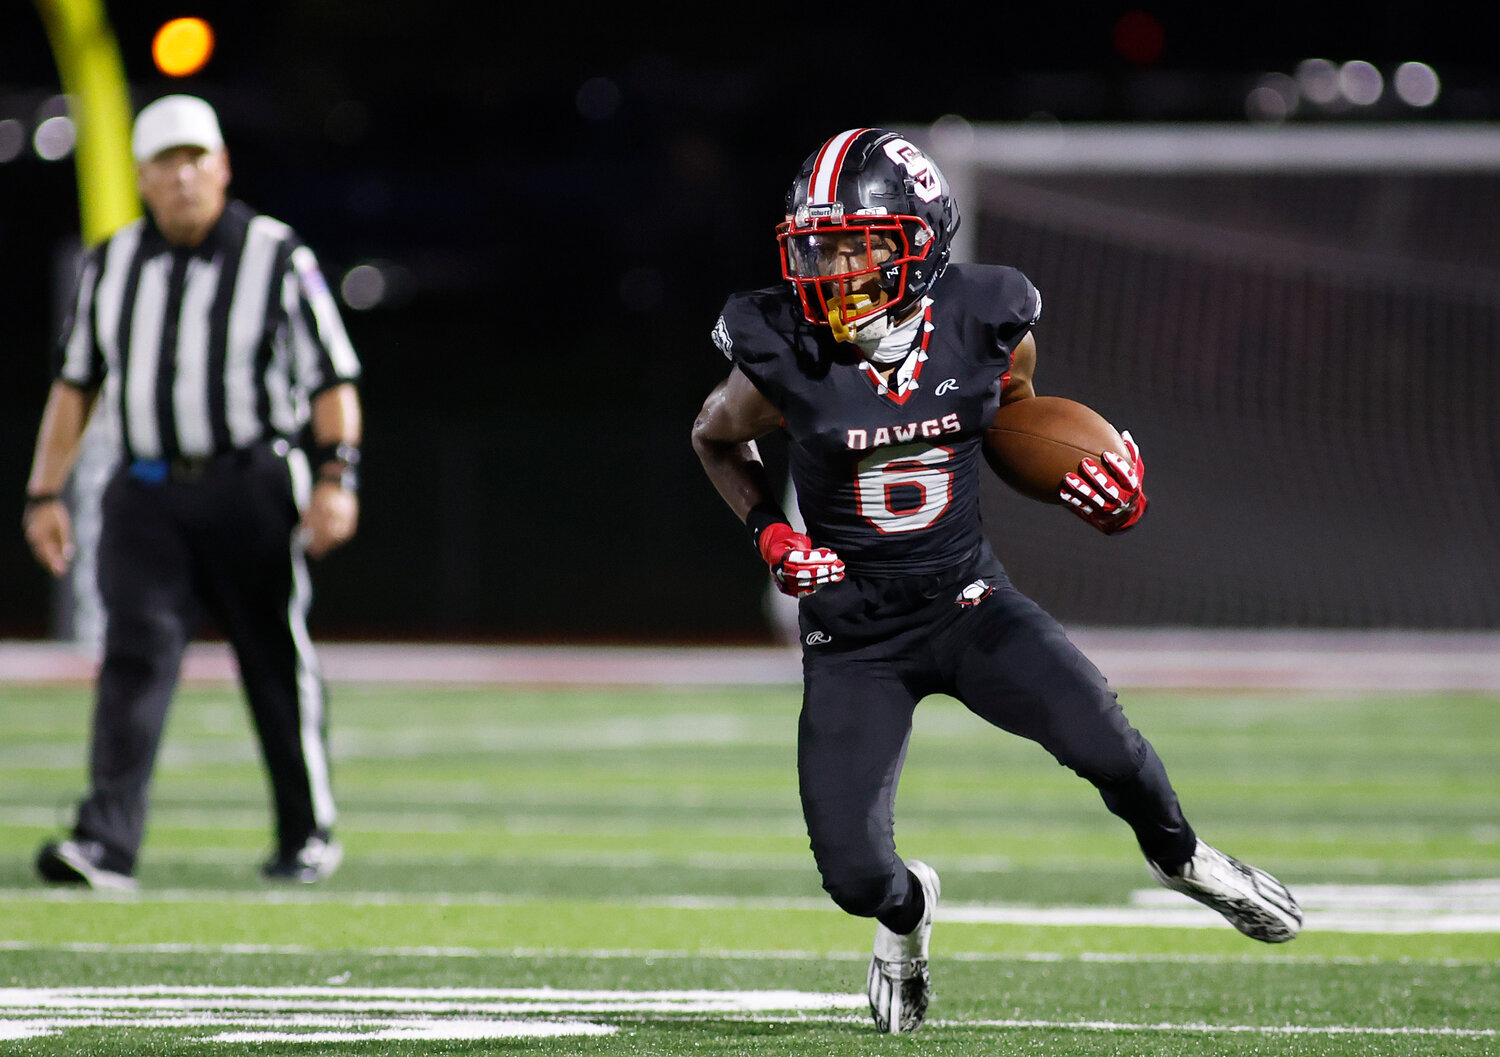 Fort Zumwalt South's Amir Purdy (6) carries the ball during a game against Warrenton, Friday, Aug. 25, 2023, at Fort Zumwalt South High School in St. Peters, Mo.